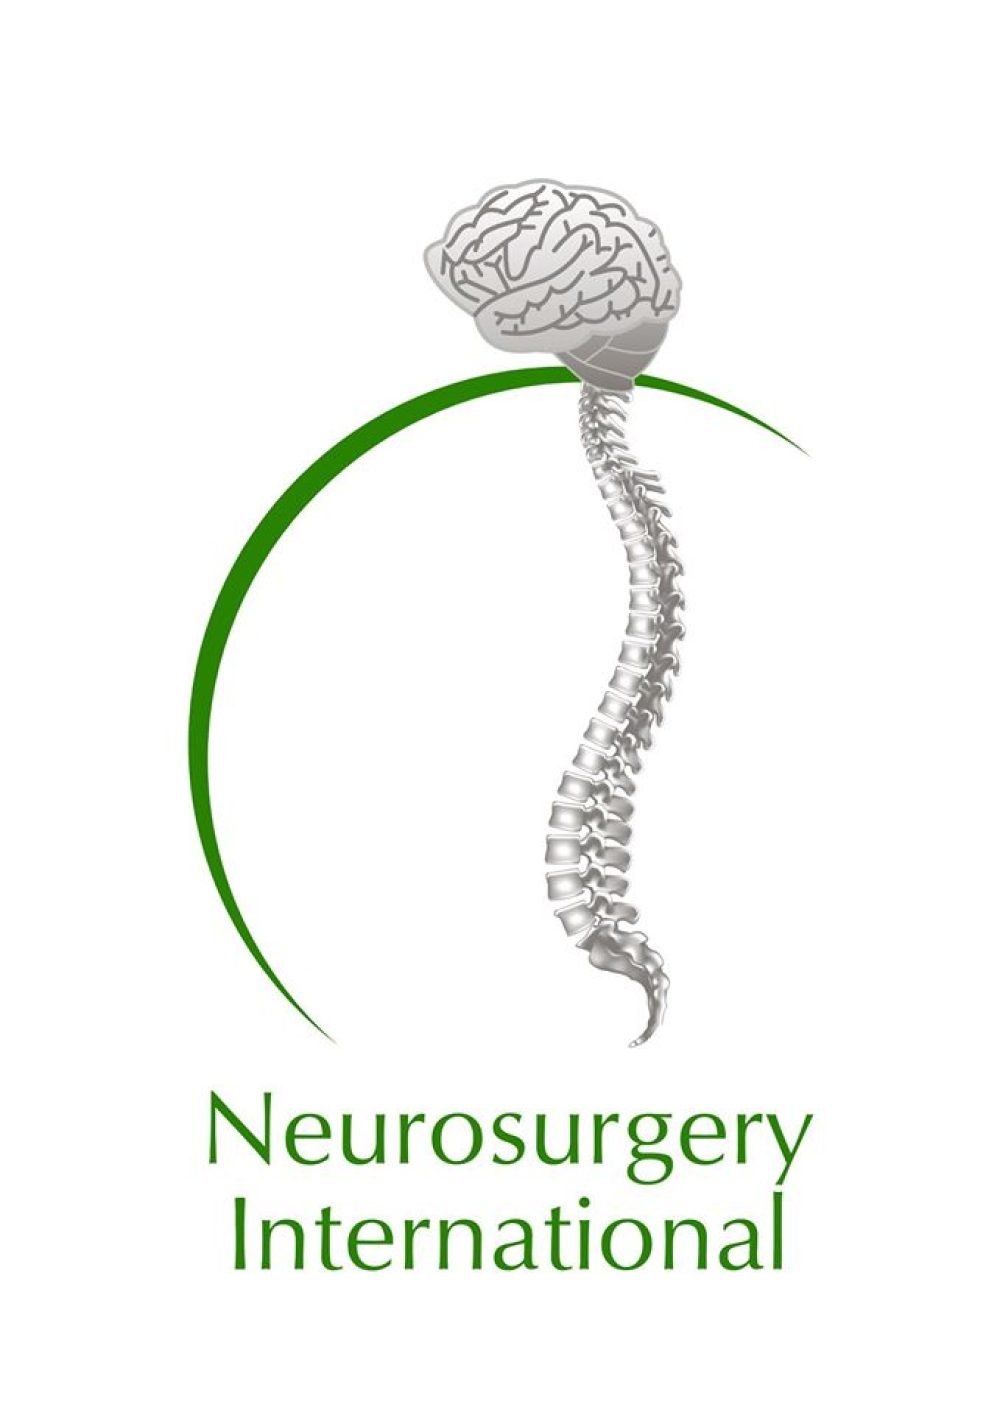 Lanman Spinal Neurosurgery Opens Up 2-Level prodisc®Cervical SK and Vivo  Clinical Trial in Los Angeles - Cuellar Spine